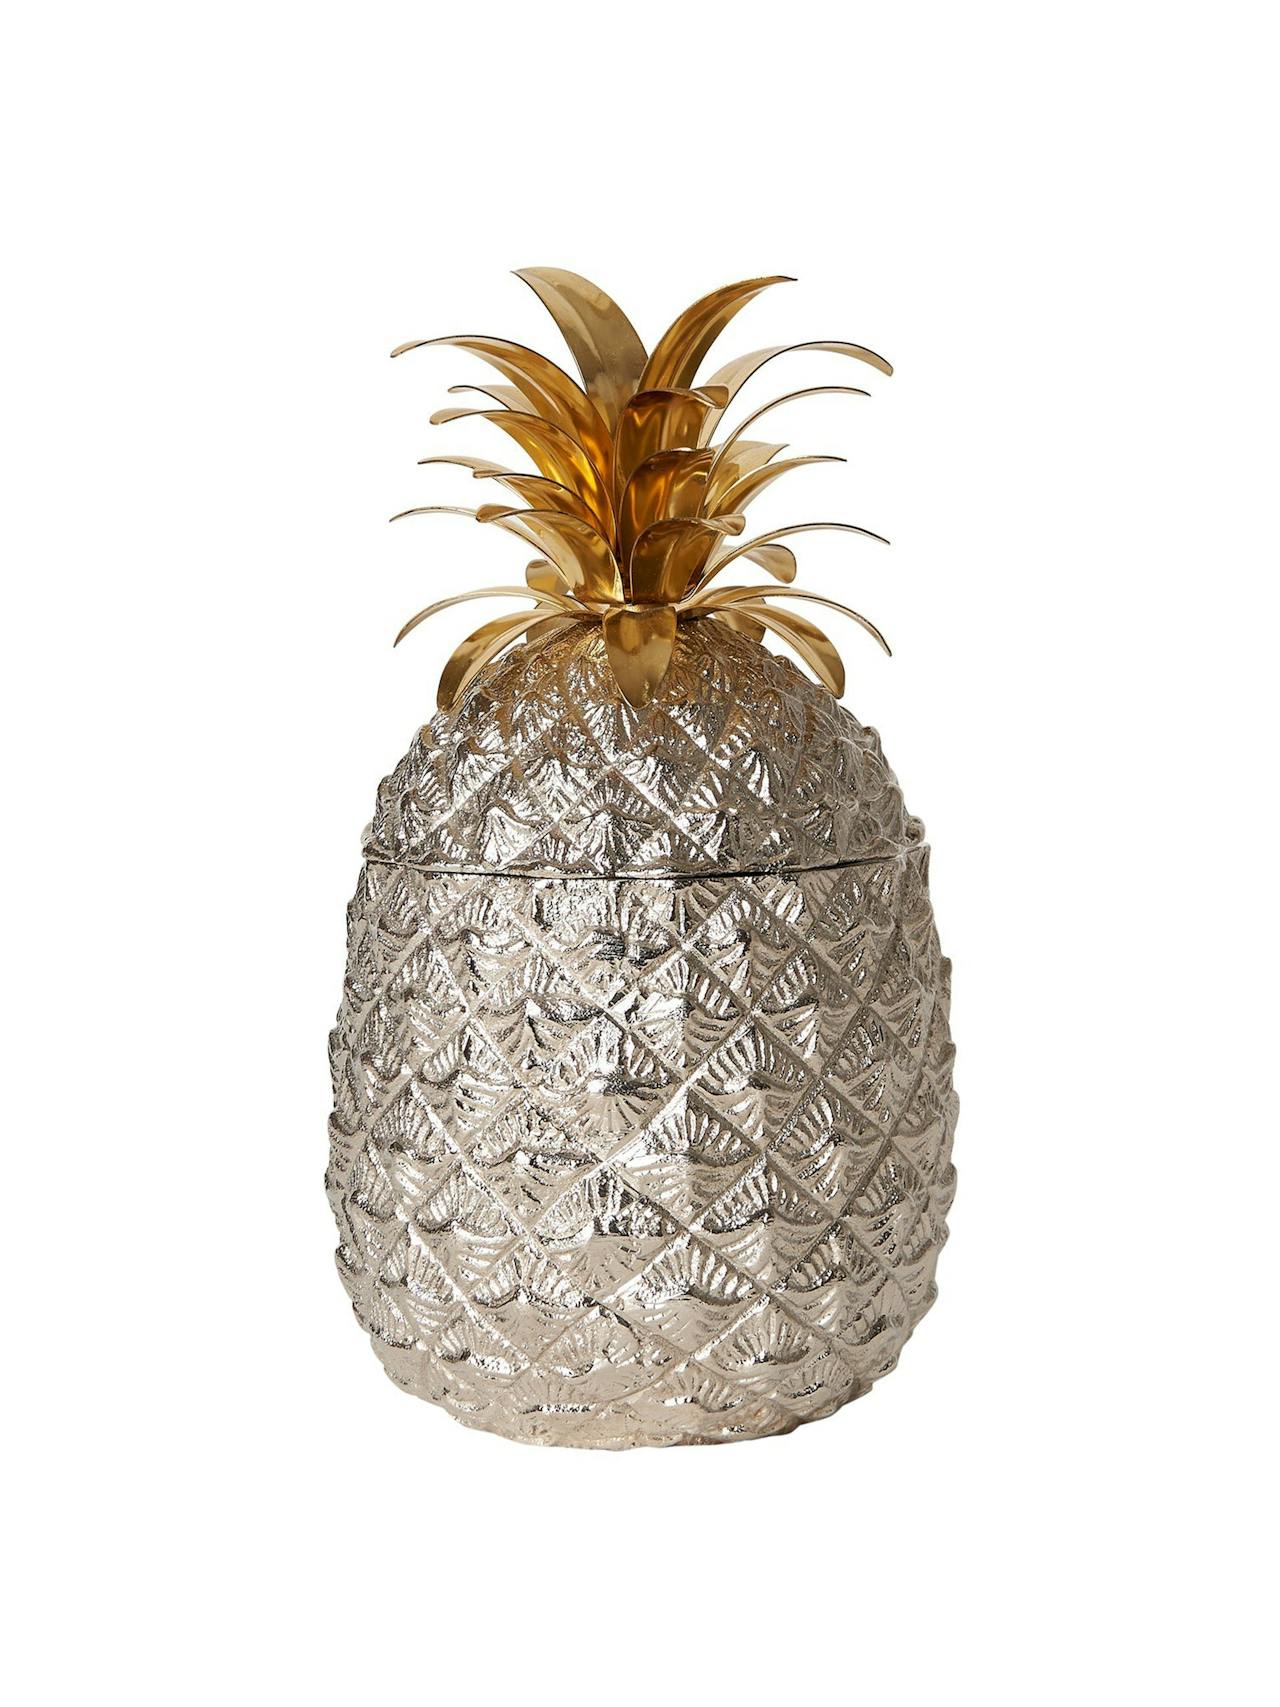 Small silver-plated pineapple ice bucket with brass leaves